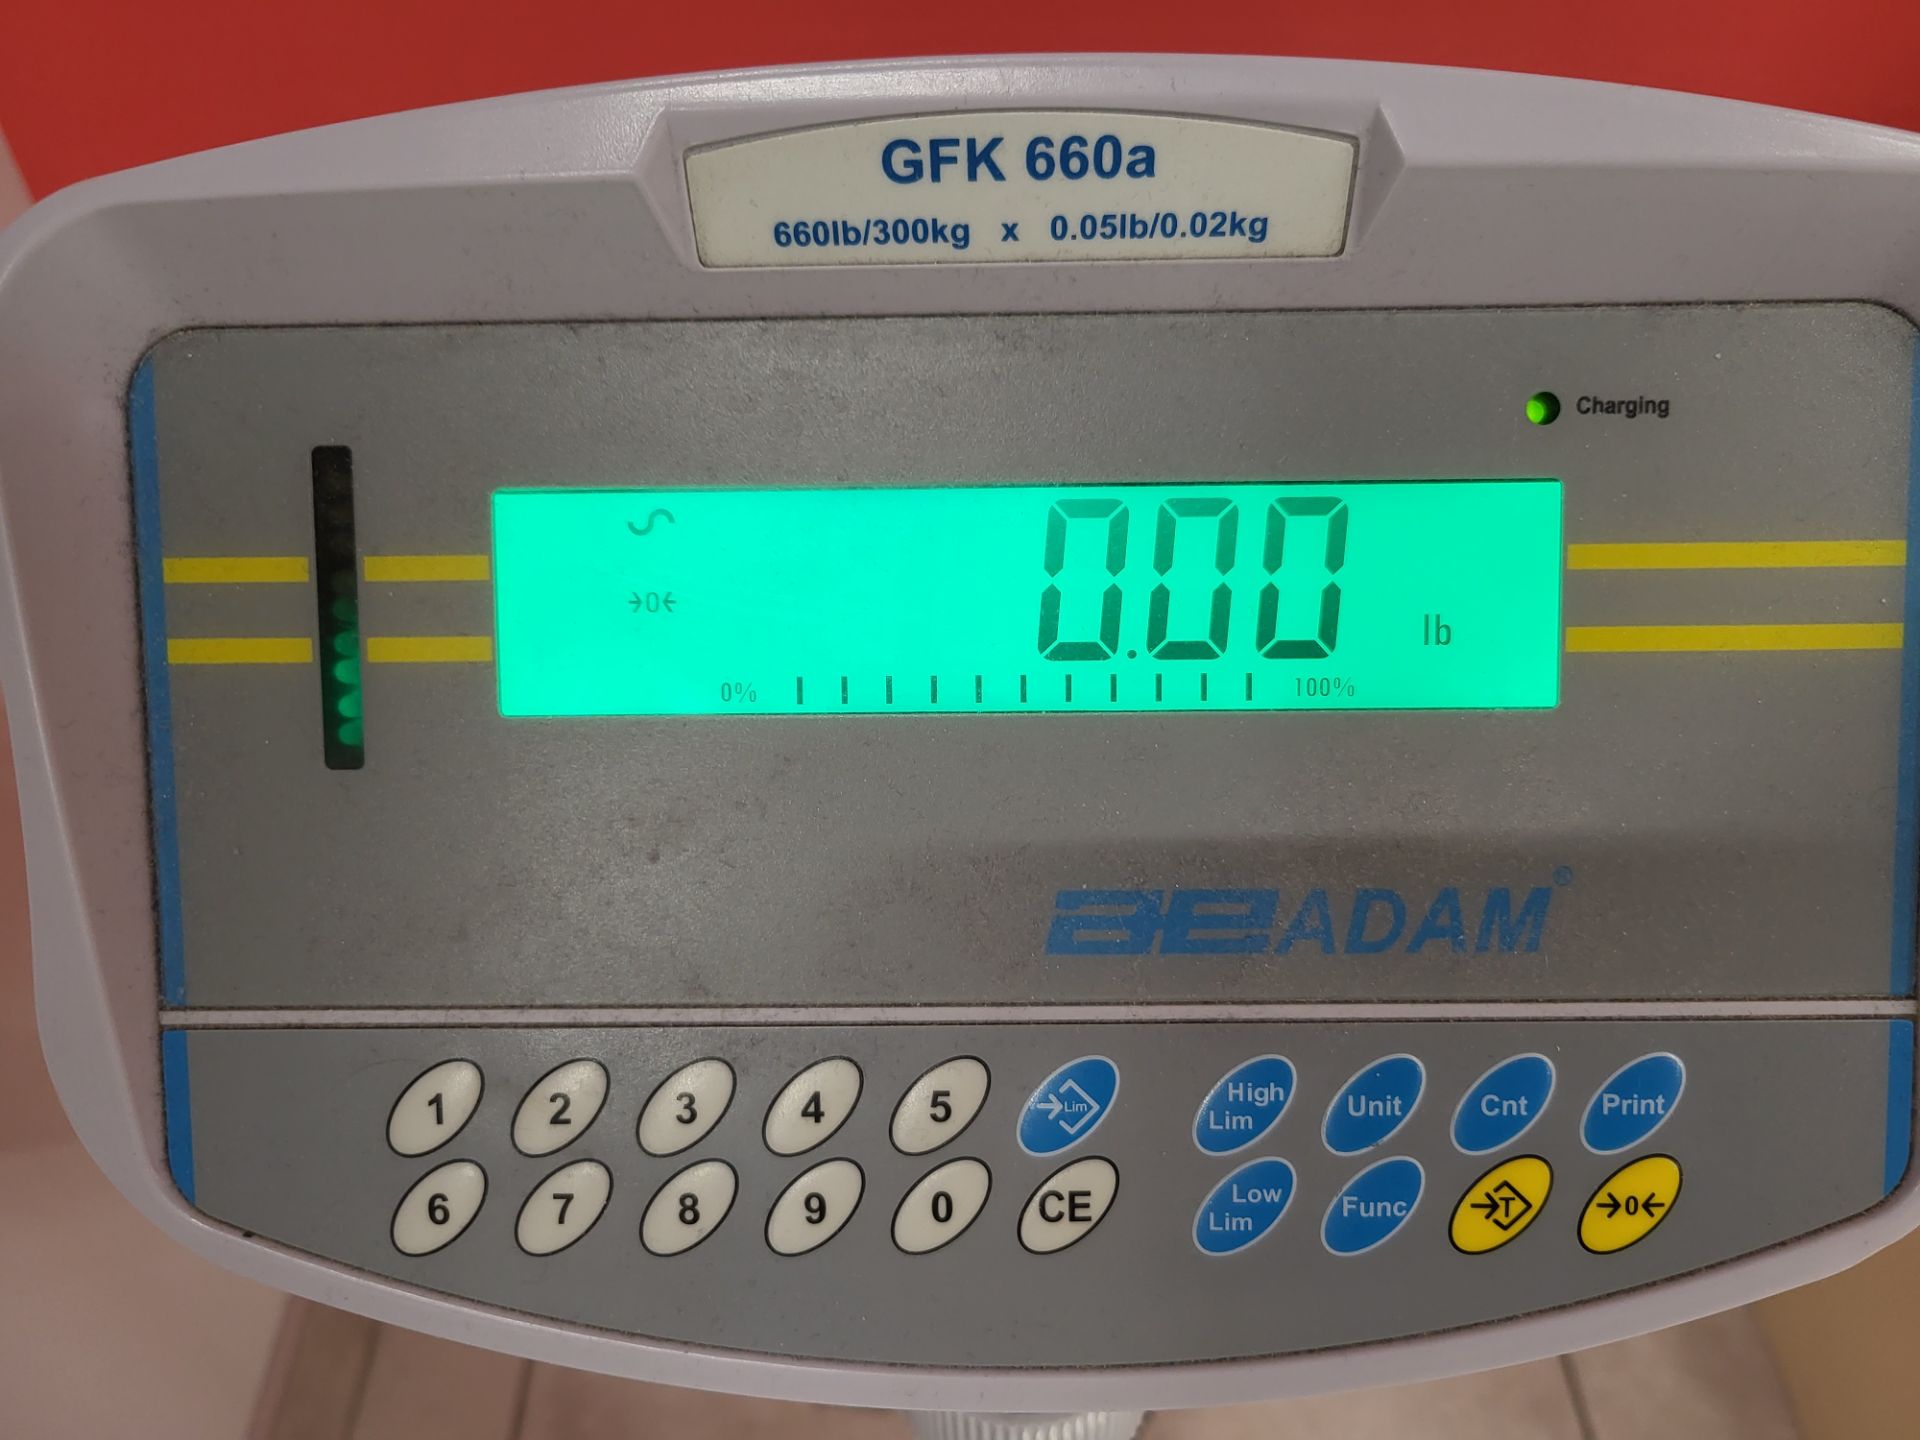 ADAM mod. GFK-660a Floor Checkweighing Scale, 660 lb / 300kg x 0.05lb/0.02kg - Image 5 of 6